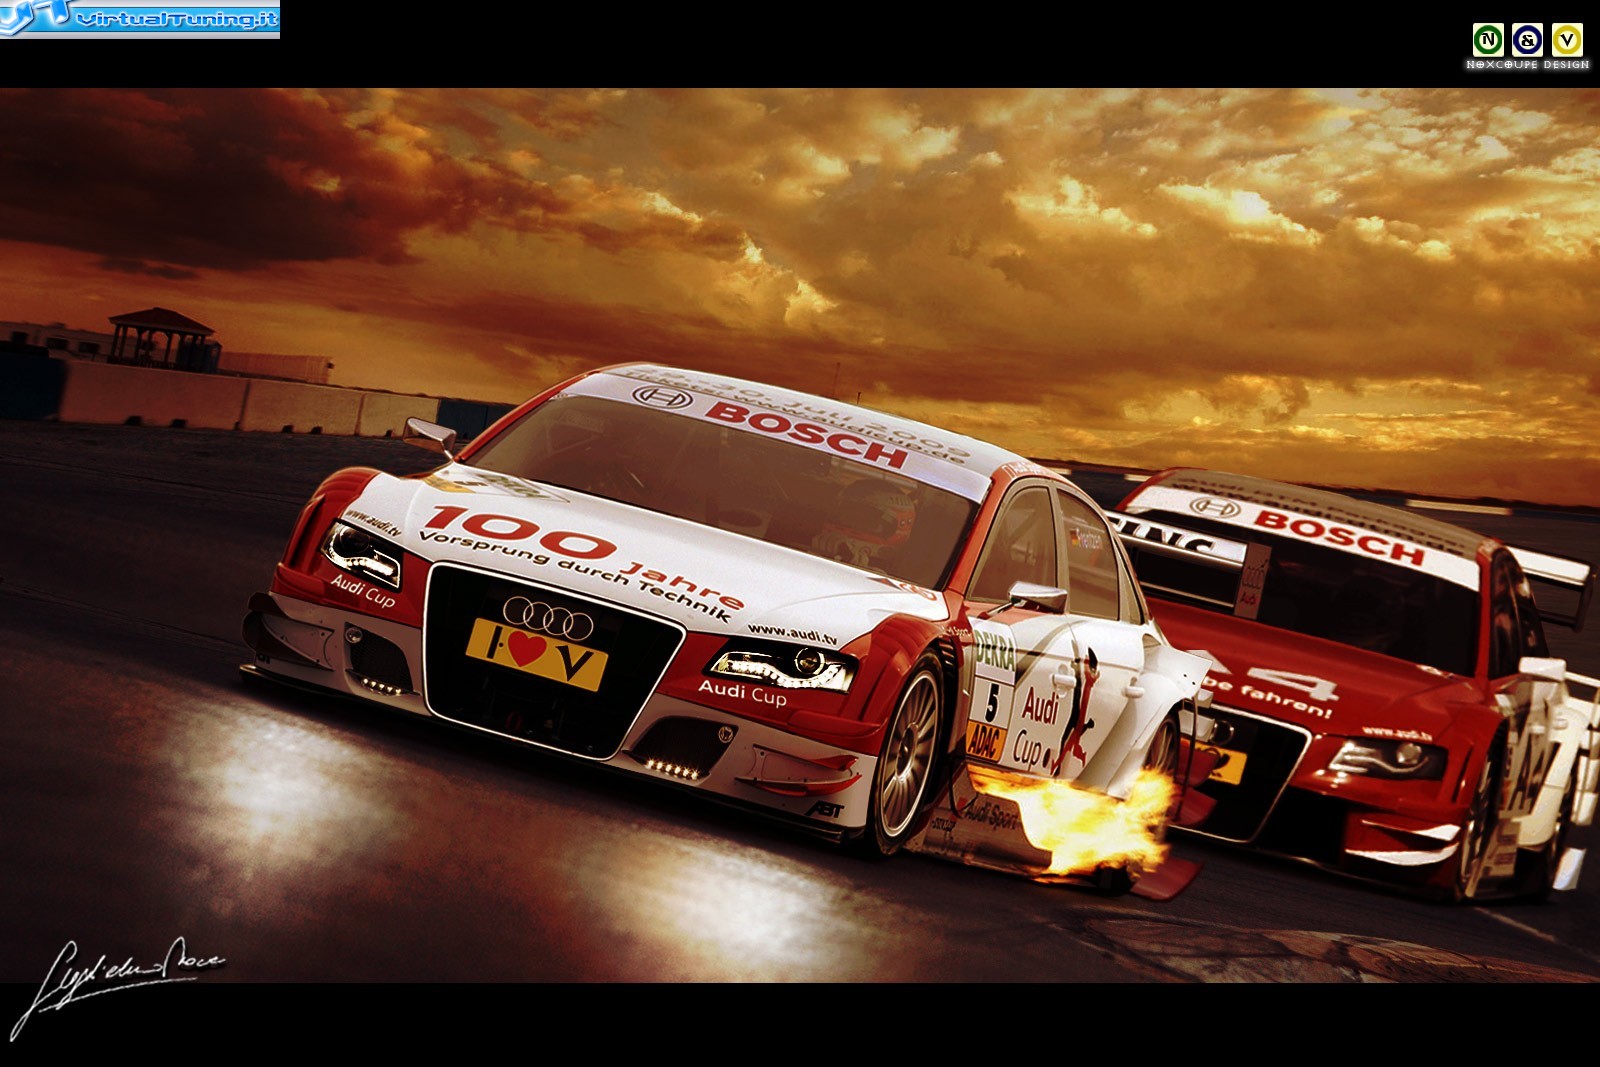 VirtualTuning AUDI A4 DTM by Noxcoupe